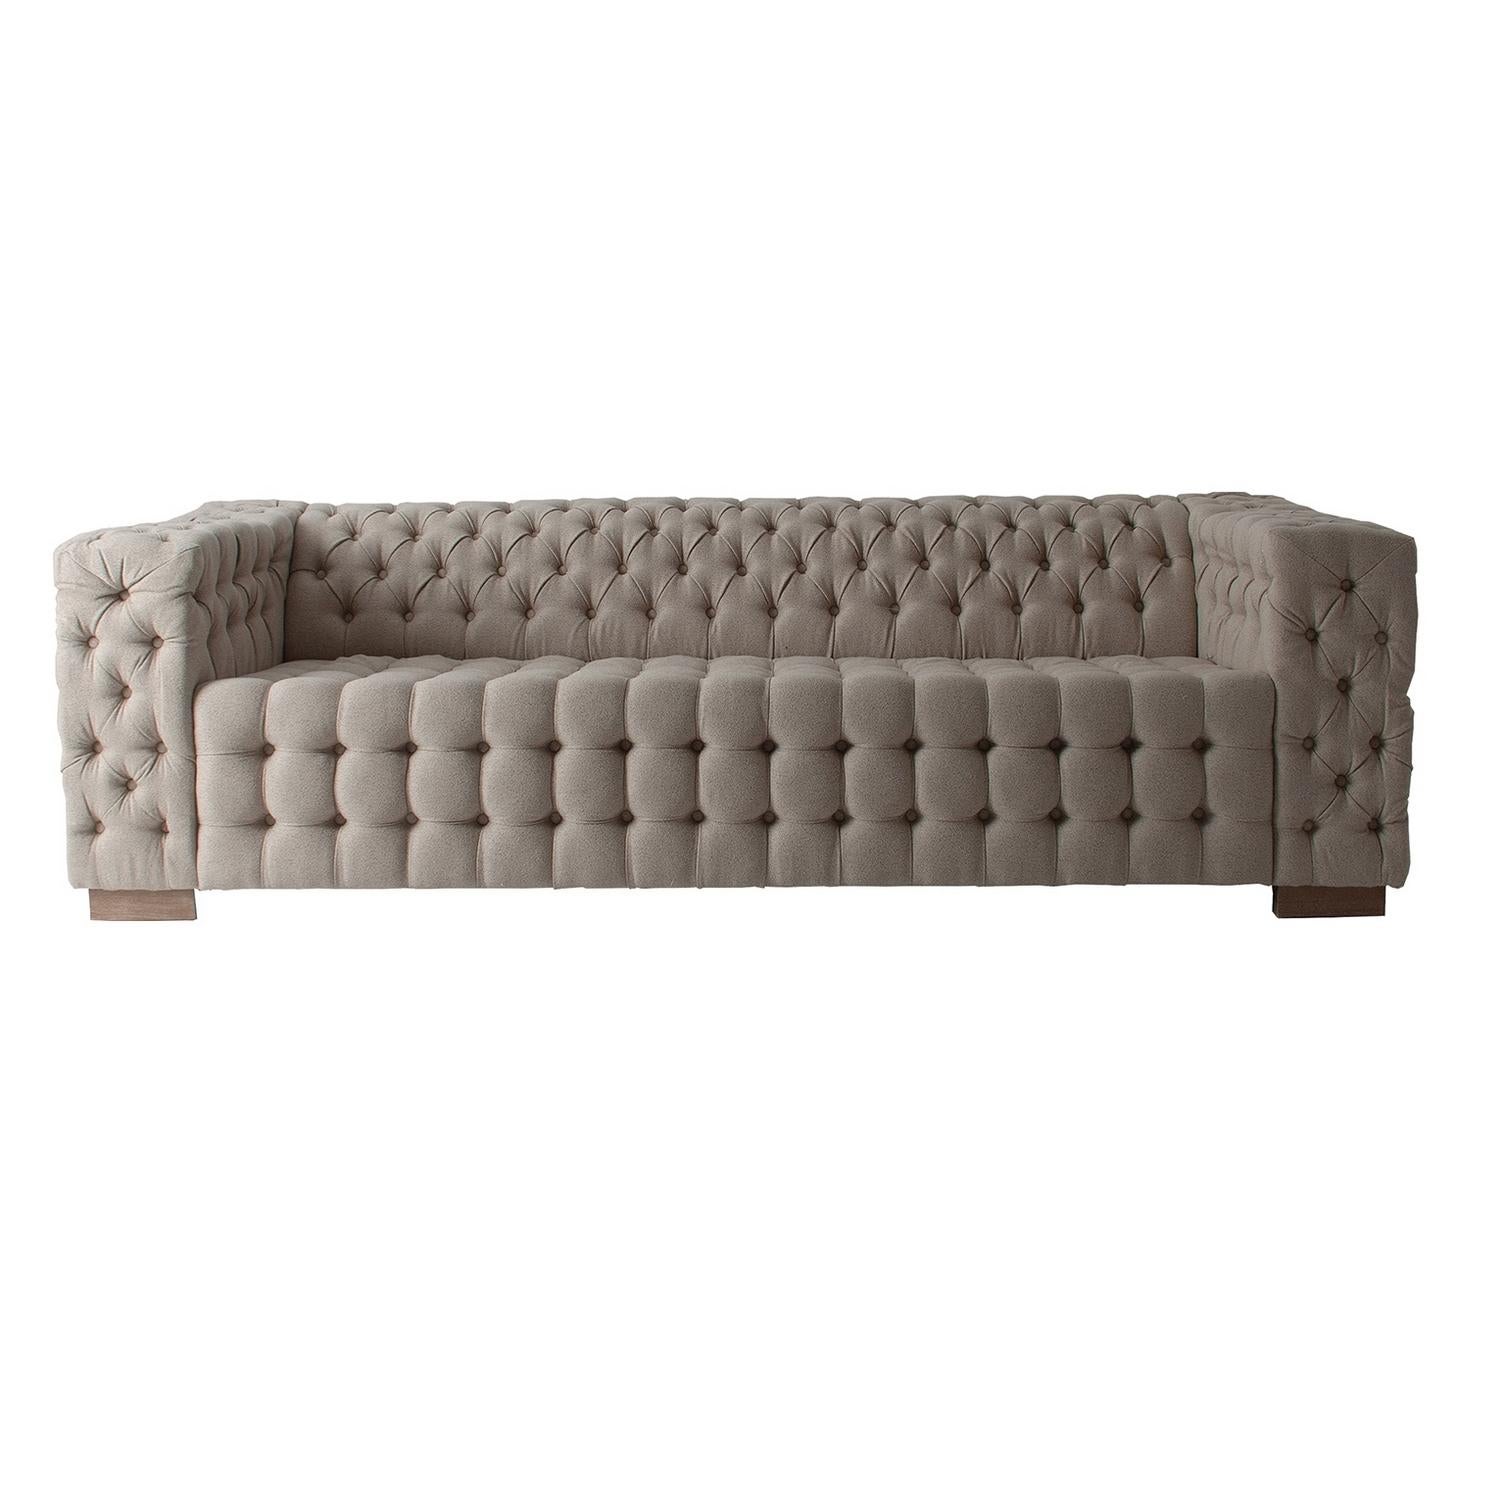 Contemporary Beige Fabric and Wooden Feet Quilted Sofa